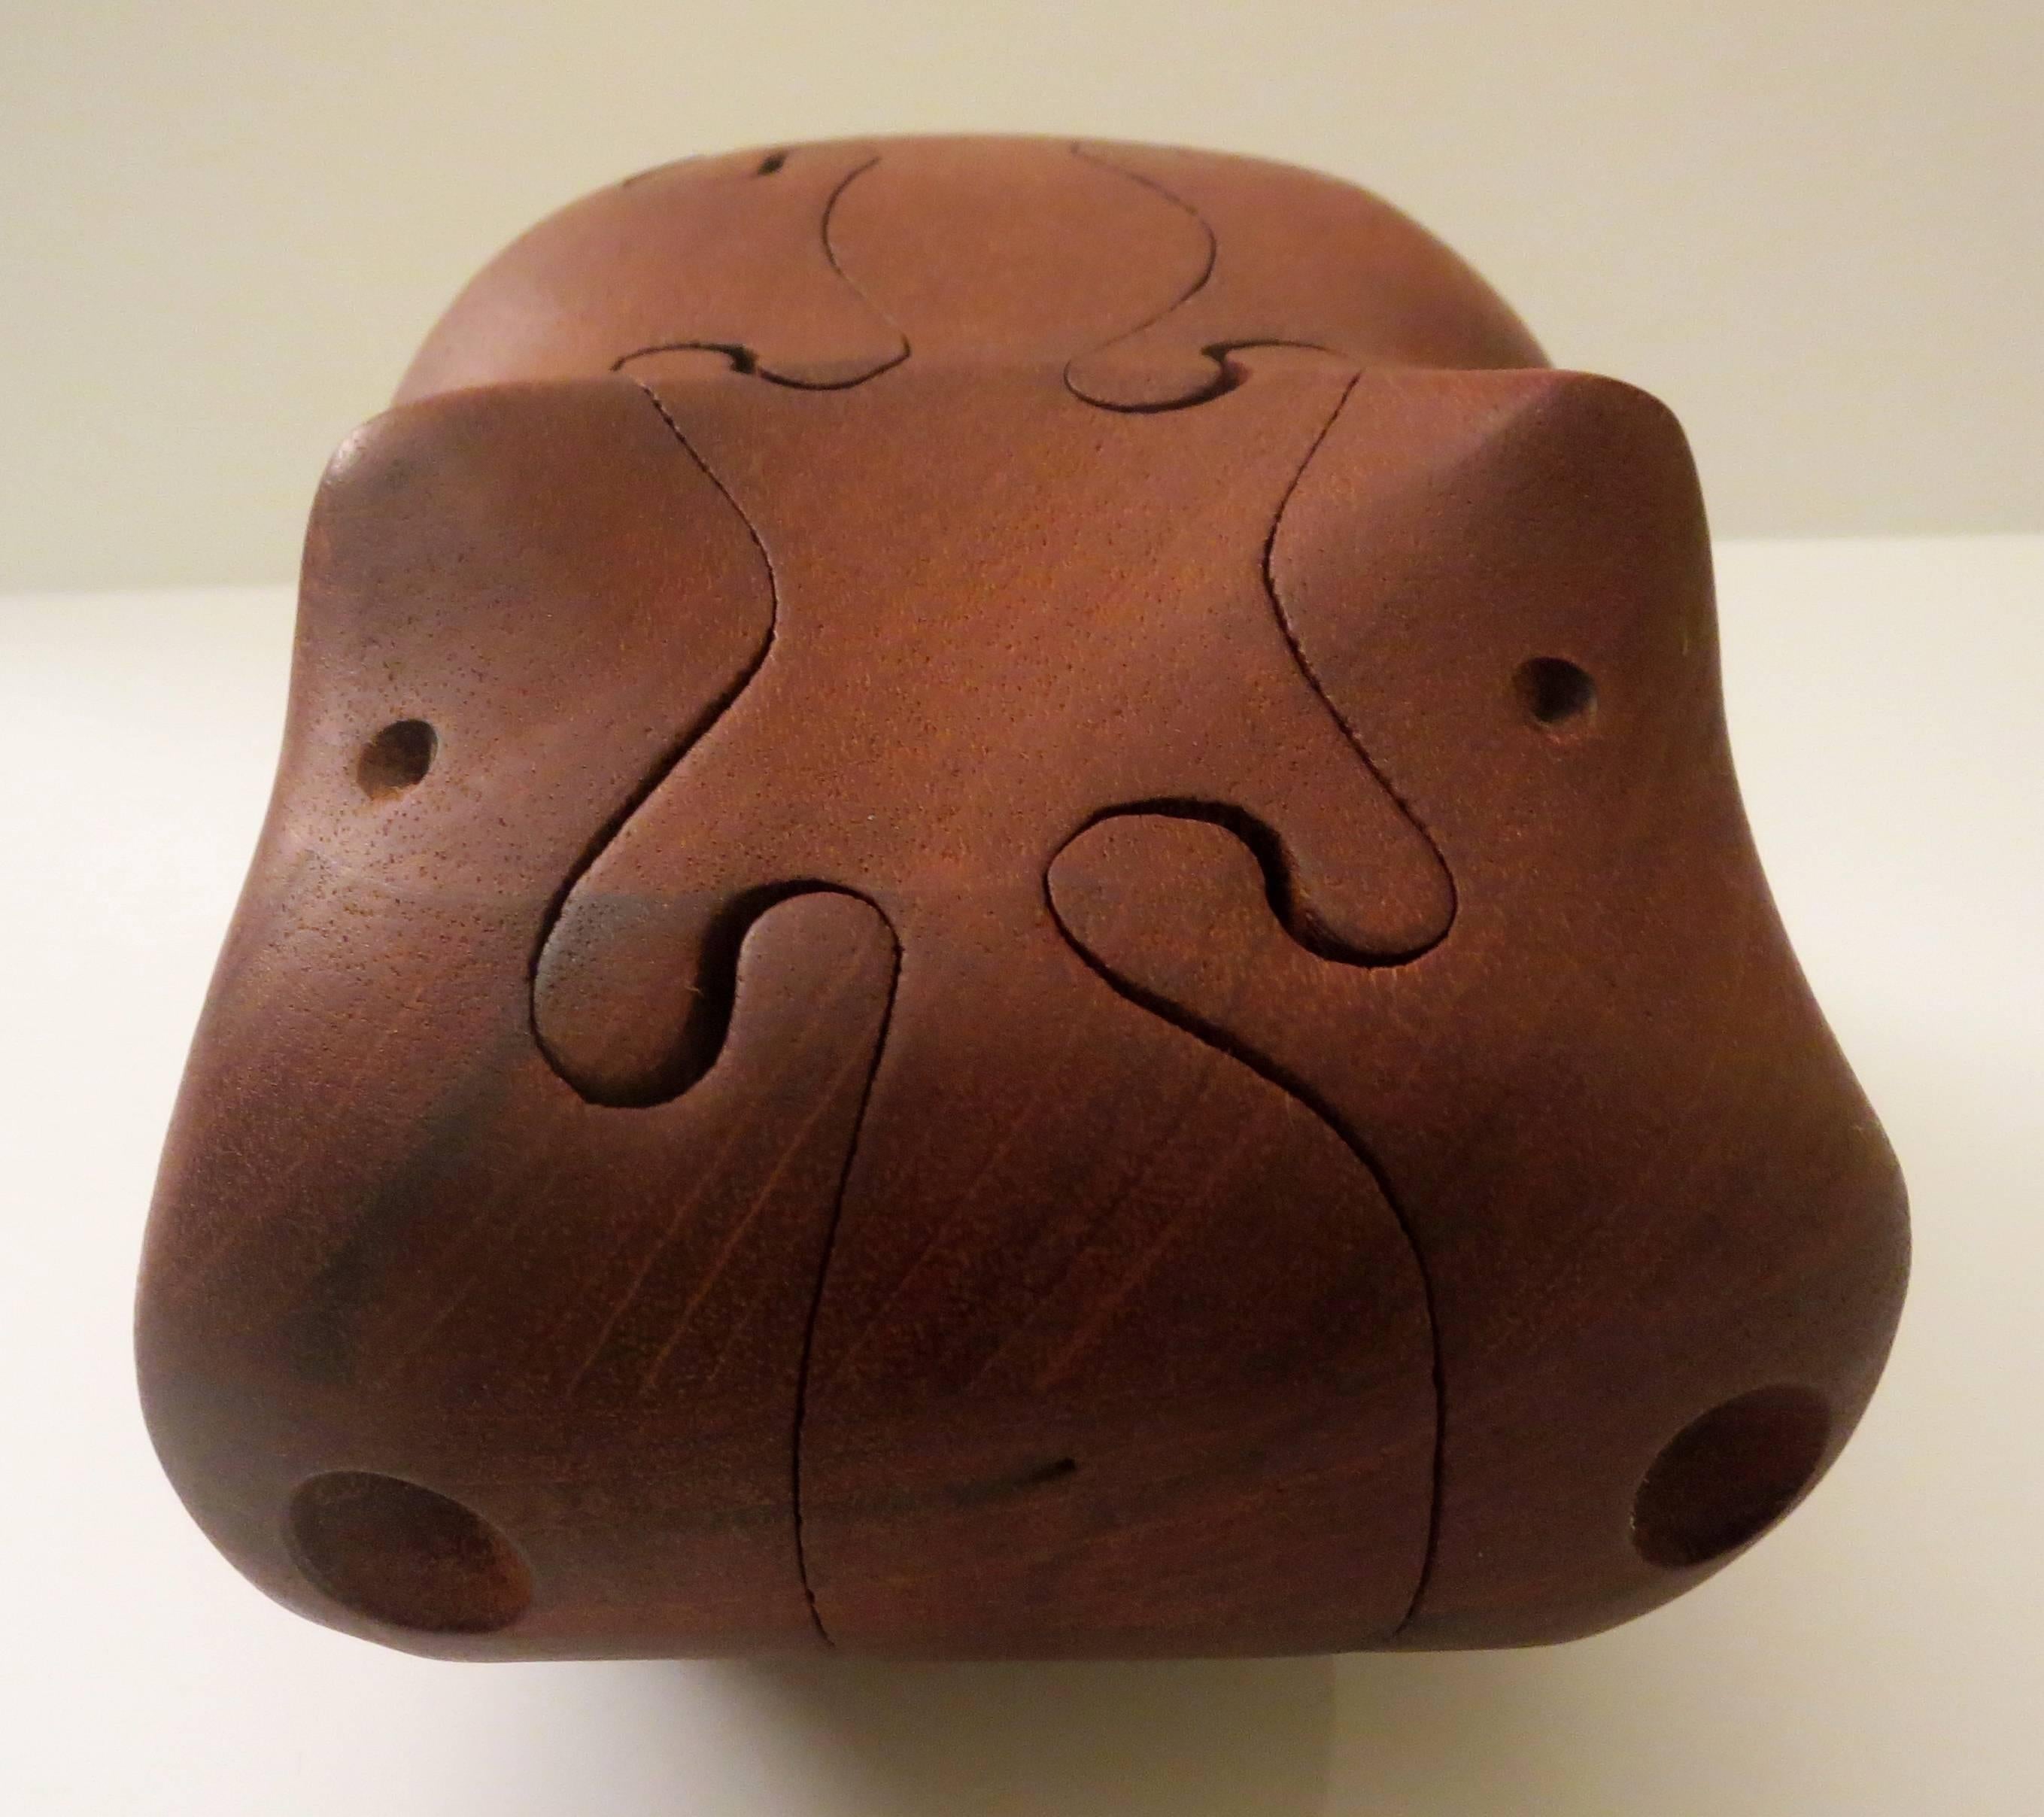 Incredible craftsmanship on this solid walnut hippo puzzle designed and hand crafted by artist Deborah Bump. Fully signed on bottom. Circa 1970s.

